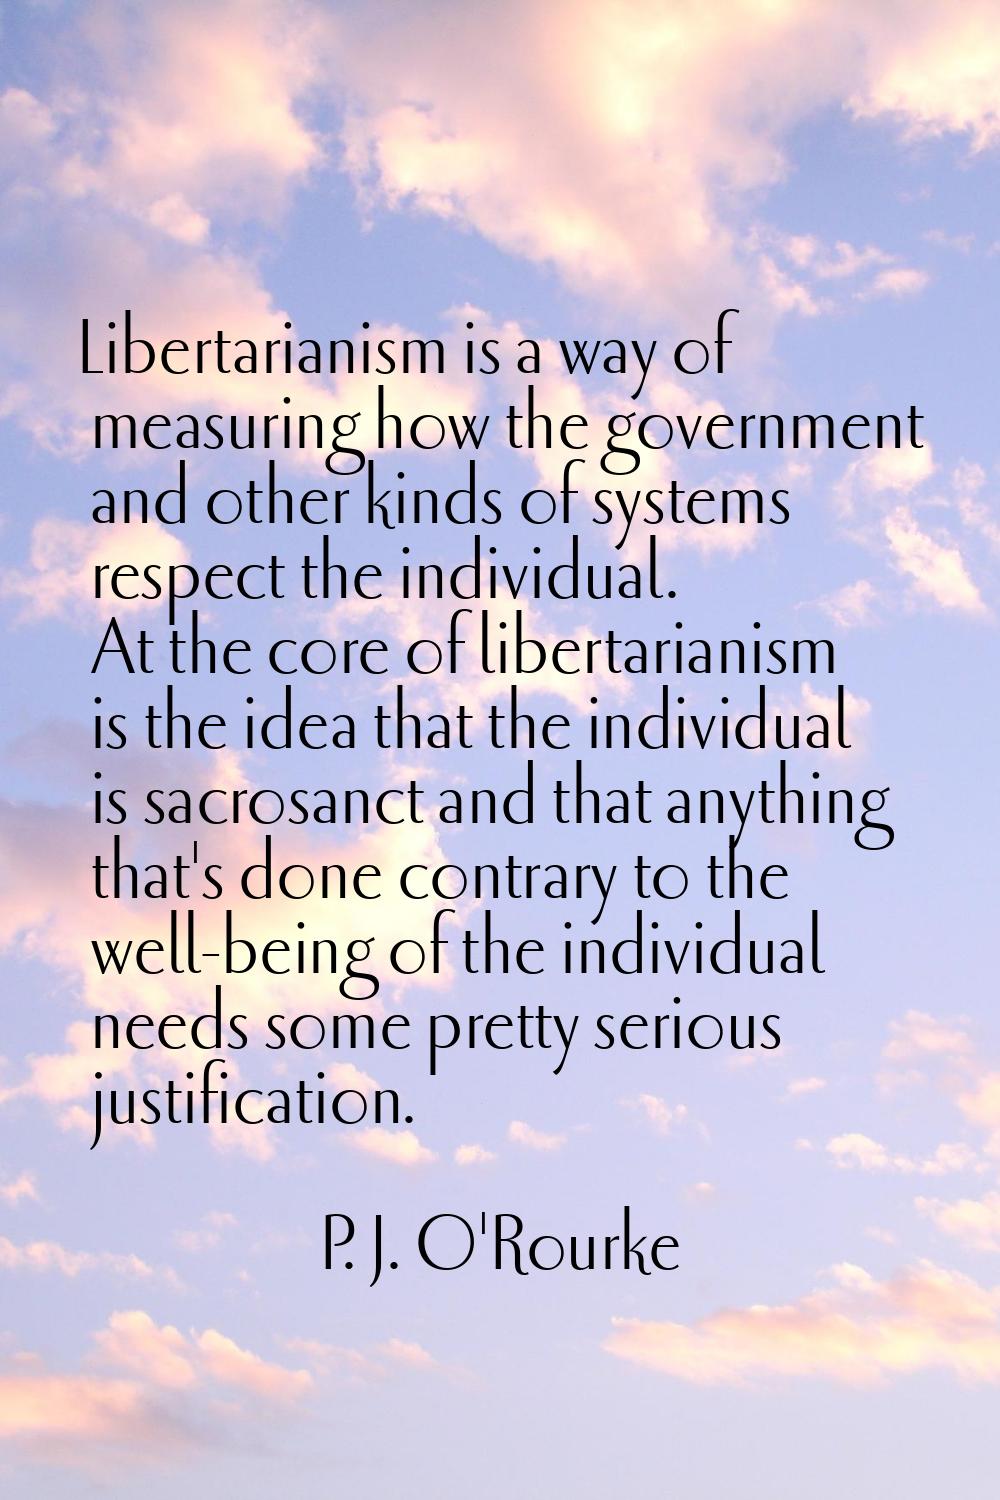 Libertarianism is a way of measuring how the government and other kinds of systems respect the indi